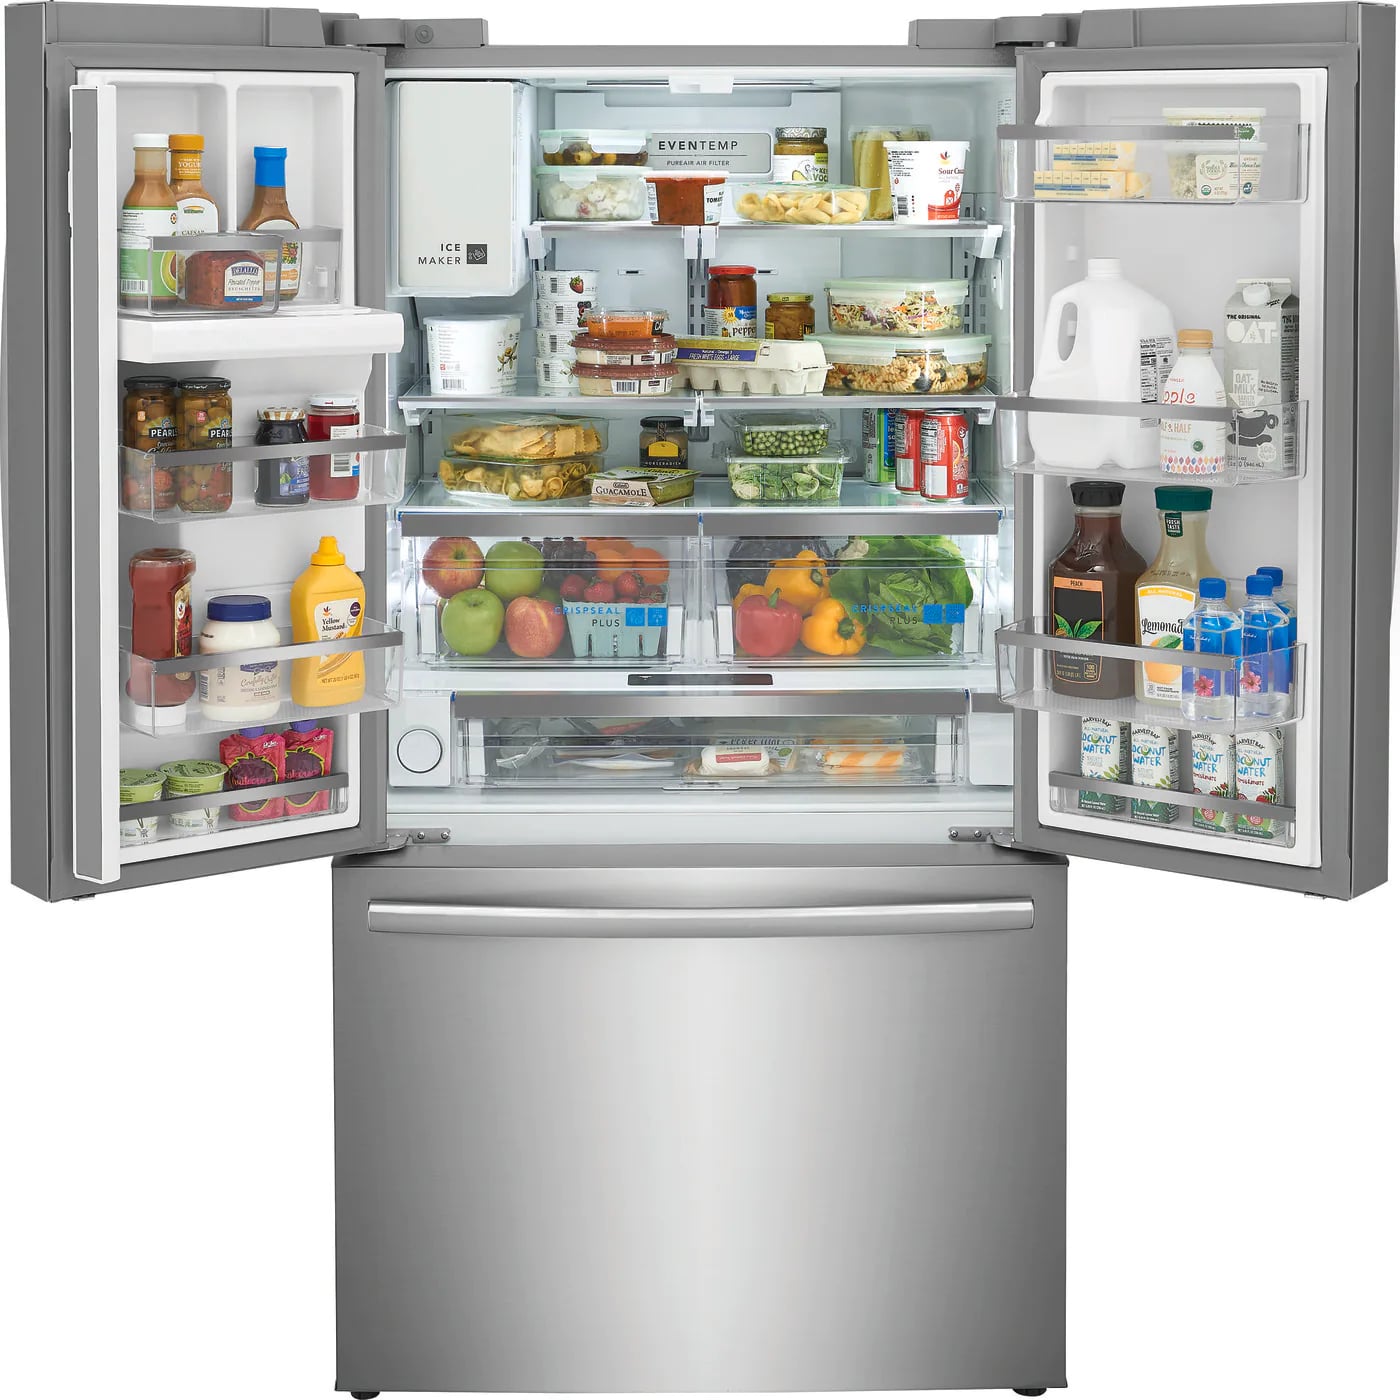 Frigidaire Gallery - 36 Inch 22.6 cu. ft French Door Refrigerator in Stainless - GRFC2353AF